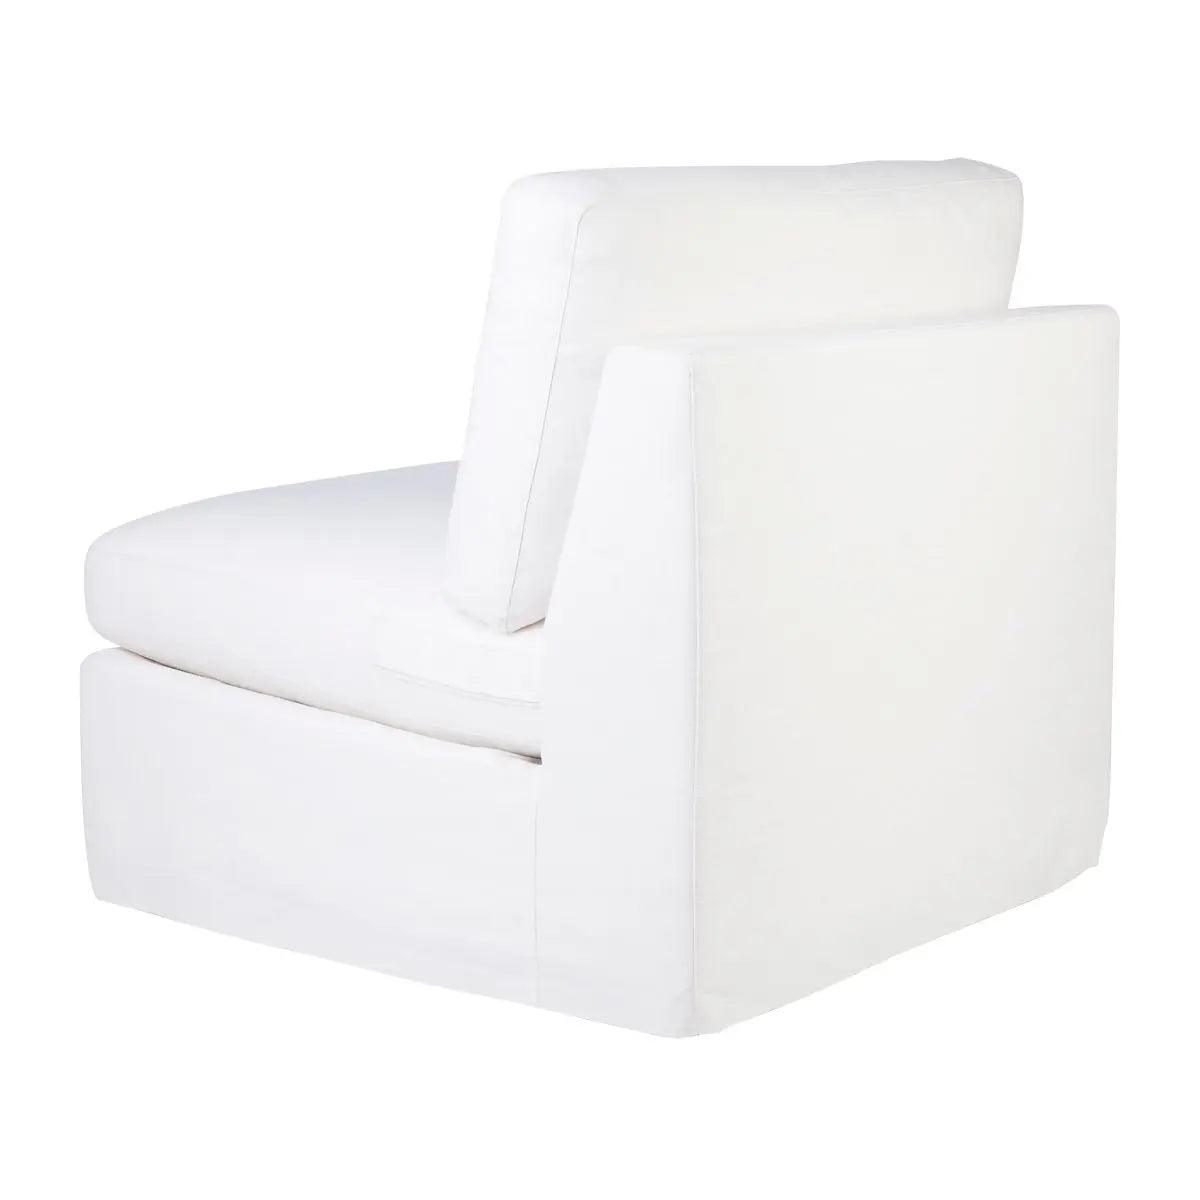 Cafe Lighting & Living Birkshire Slip Cover Occasional Chair - White Linen - Occasional Chair324569320294120910 4